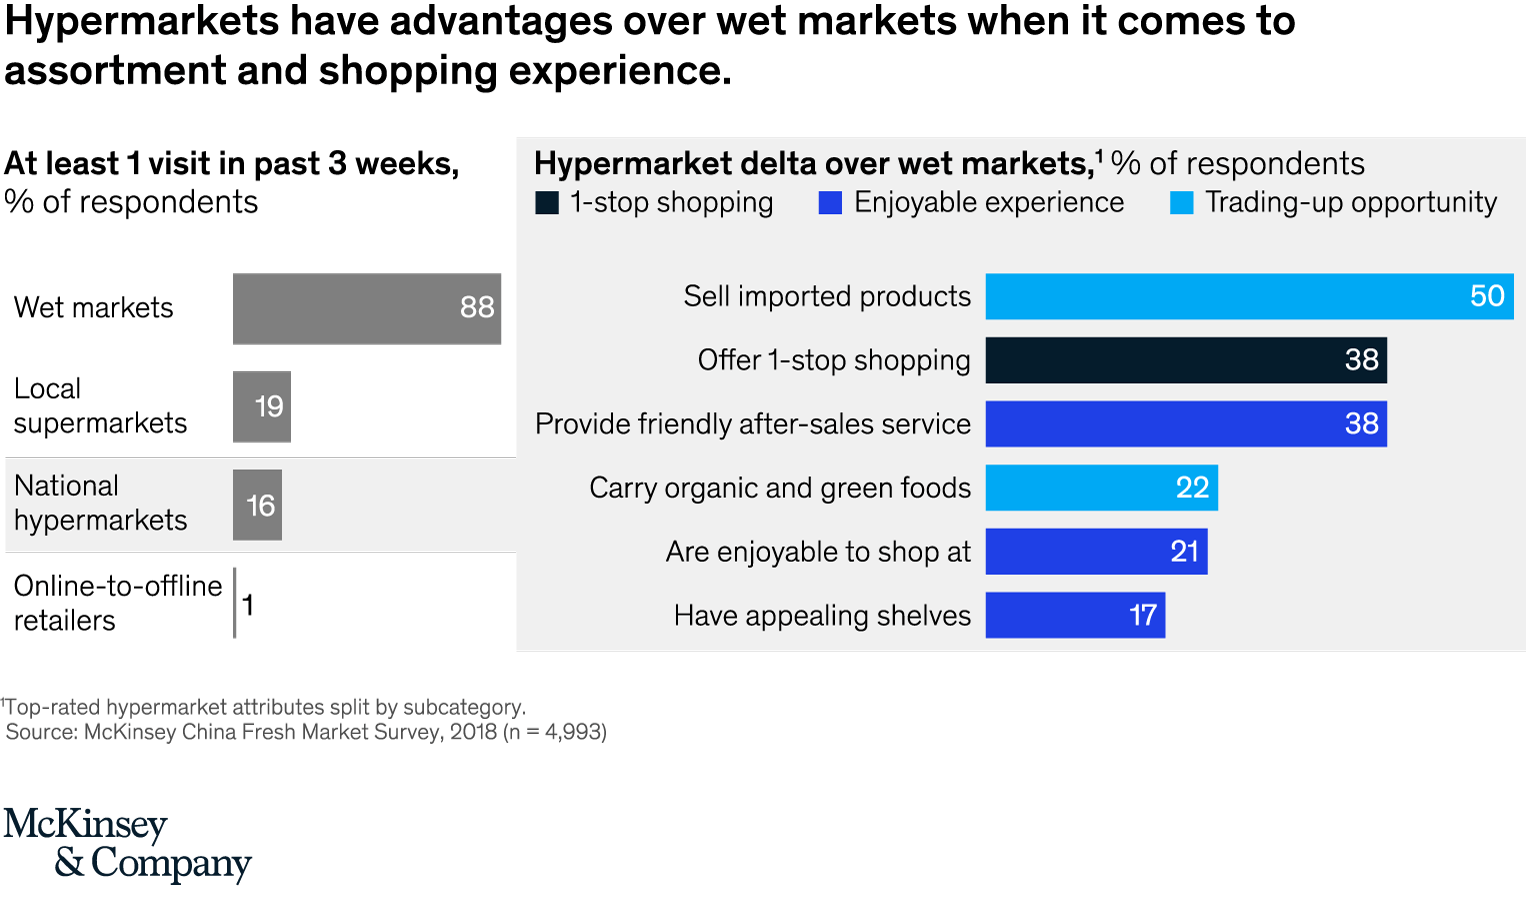 Hypermarkets have advantages over wet markets when it comes to assortment and shopping experience.